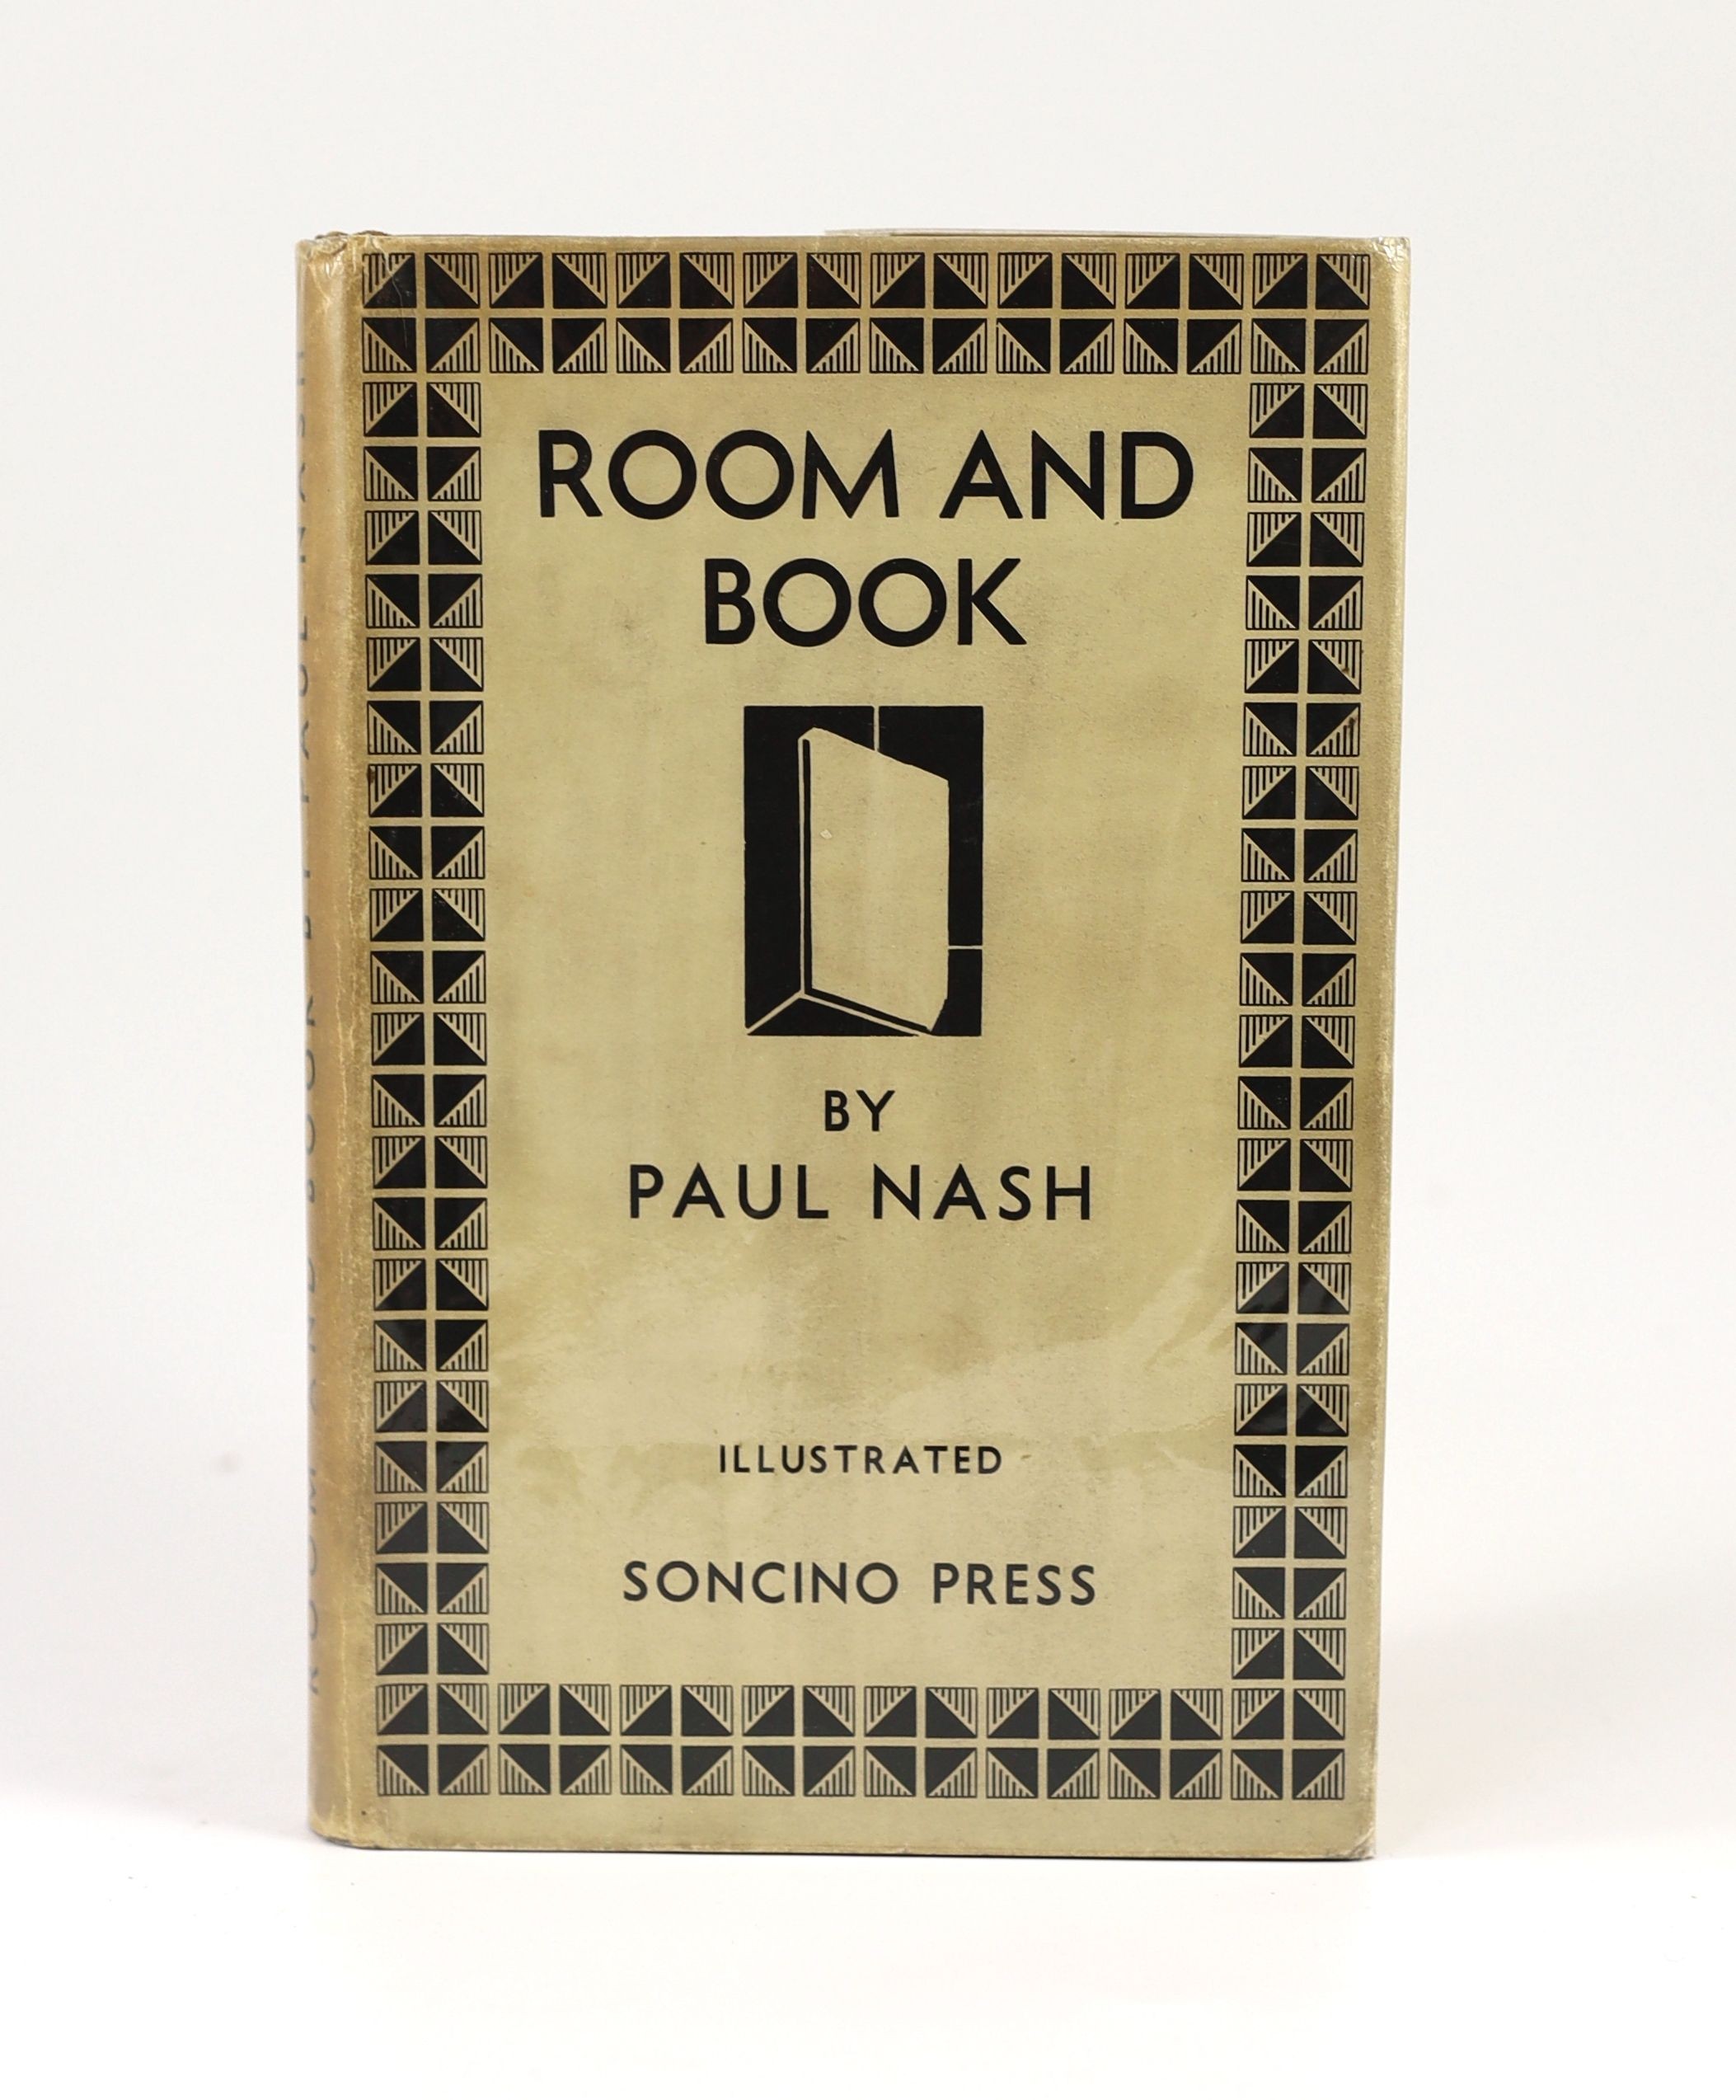 Nash, Paul - Room and Book. 1st edition. Complete with 18 illustrated plates plus numerous illustrations in the text, some of which are coloured or tipped-in. Publishers buckram with letters direct on spine. Original d/j